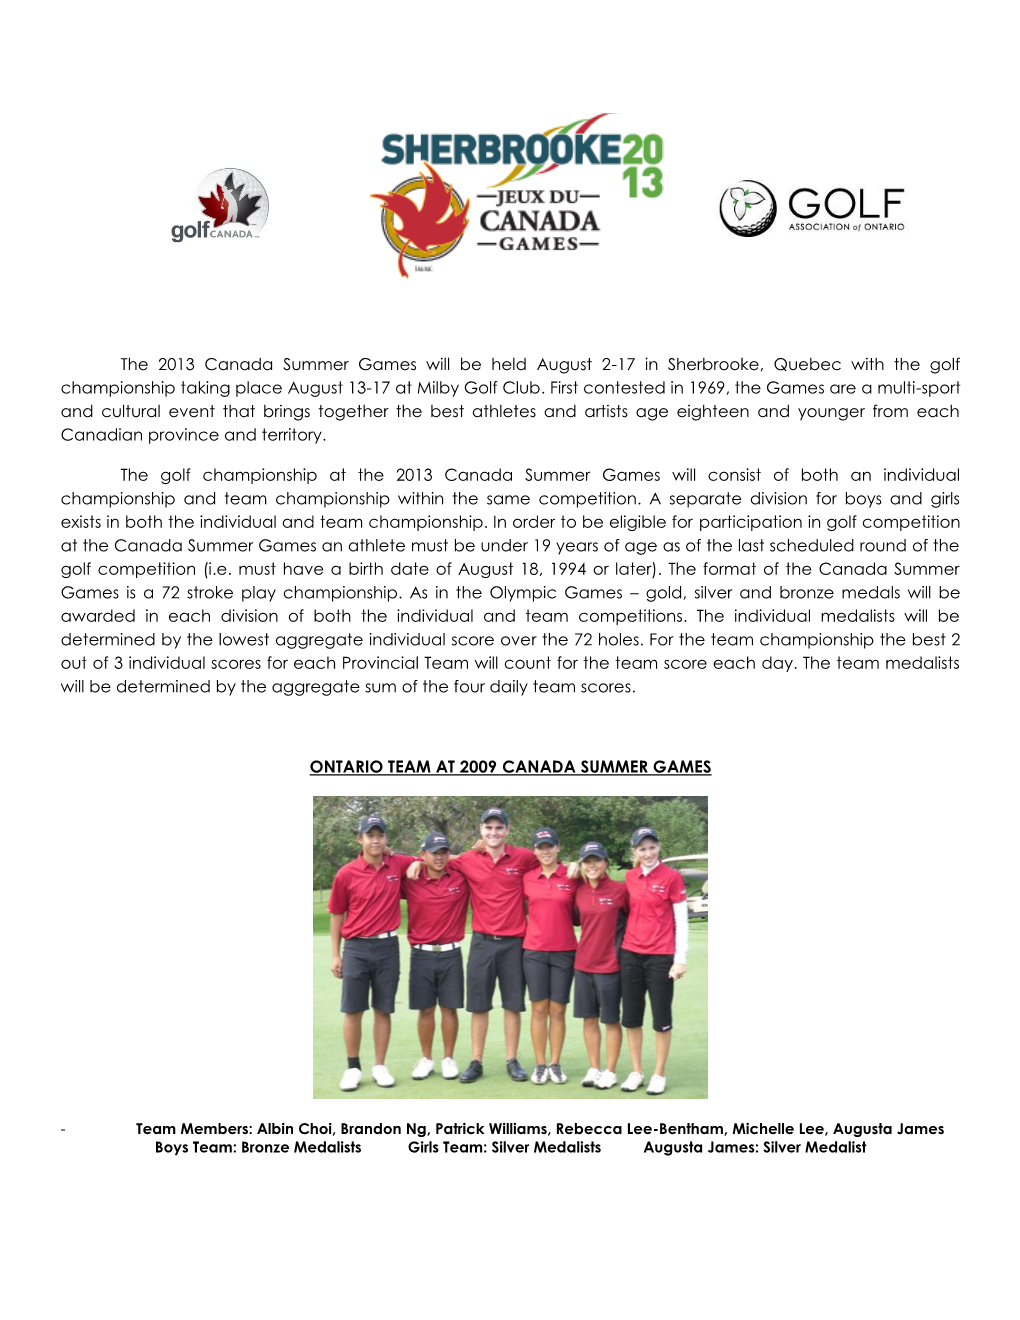 The 2013 Canada Summer Games Will Be Held August 2-17 in Sherbrooke, Quebec with the Golf Championship Taking Place August 13-17 at Milby Golf Club